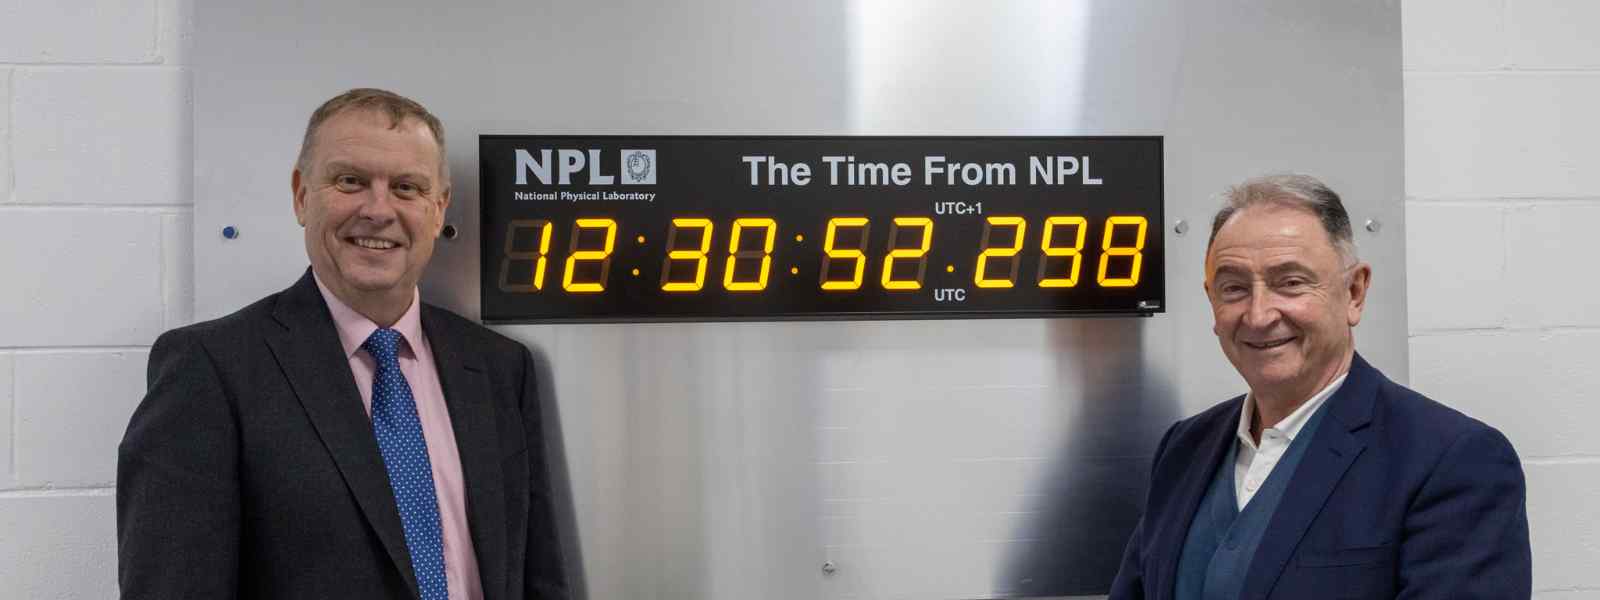 Strathclyde Principal and Vice-Chancellor Professor Sir Jim McDonald (right) with NPL CEO Dr Peter Thompson at the the NPL-enabled clock at the new innovation node at Strathclyde. Photo by NPL